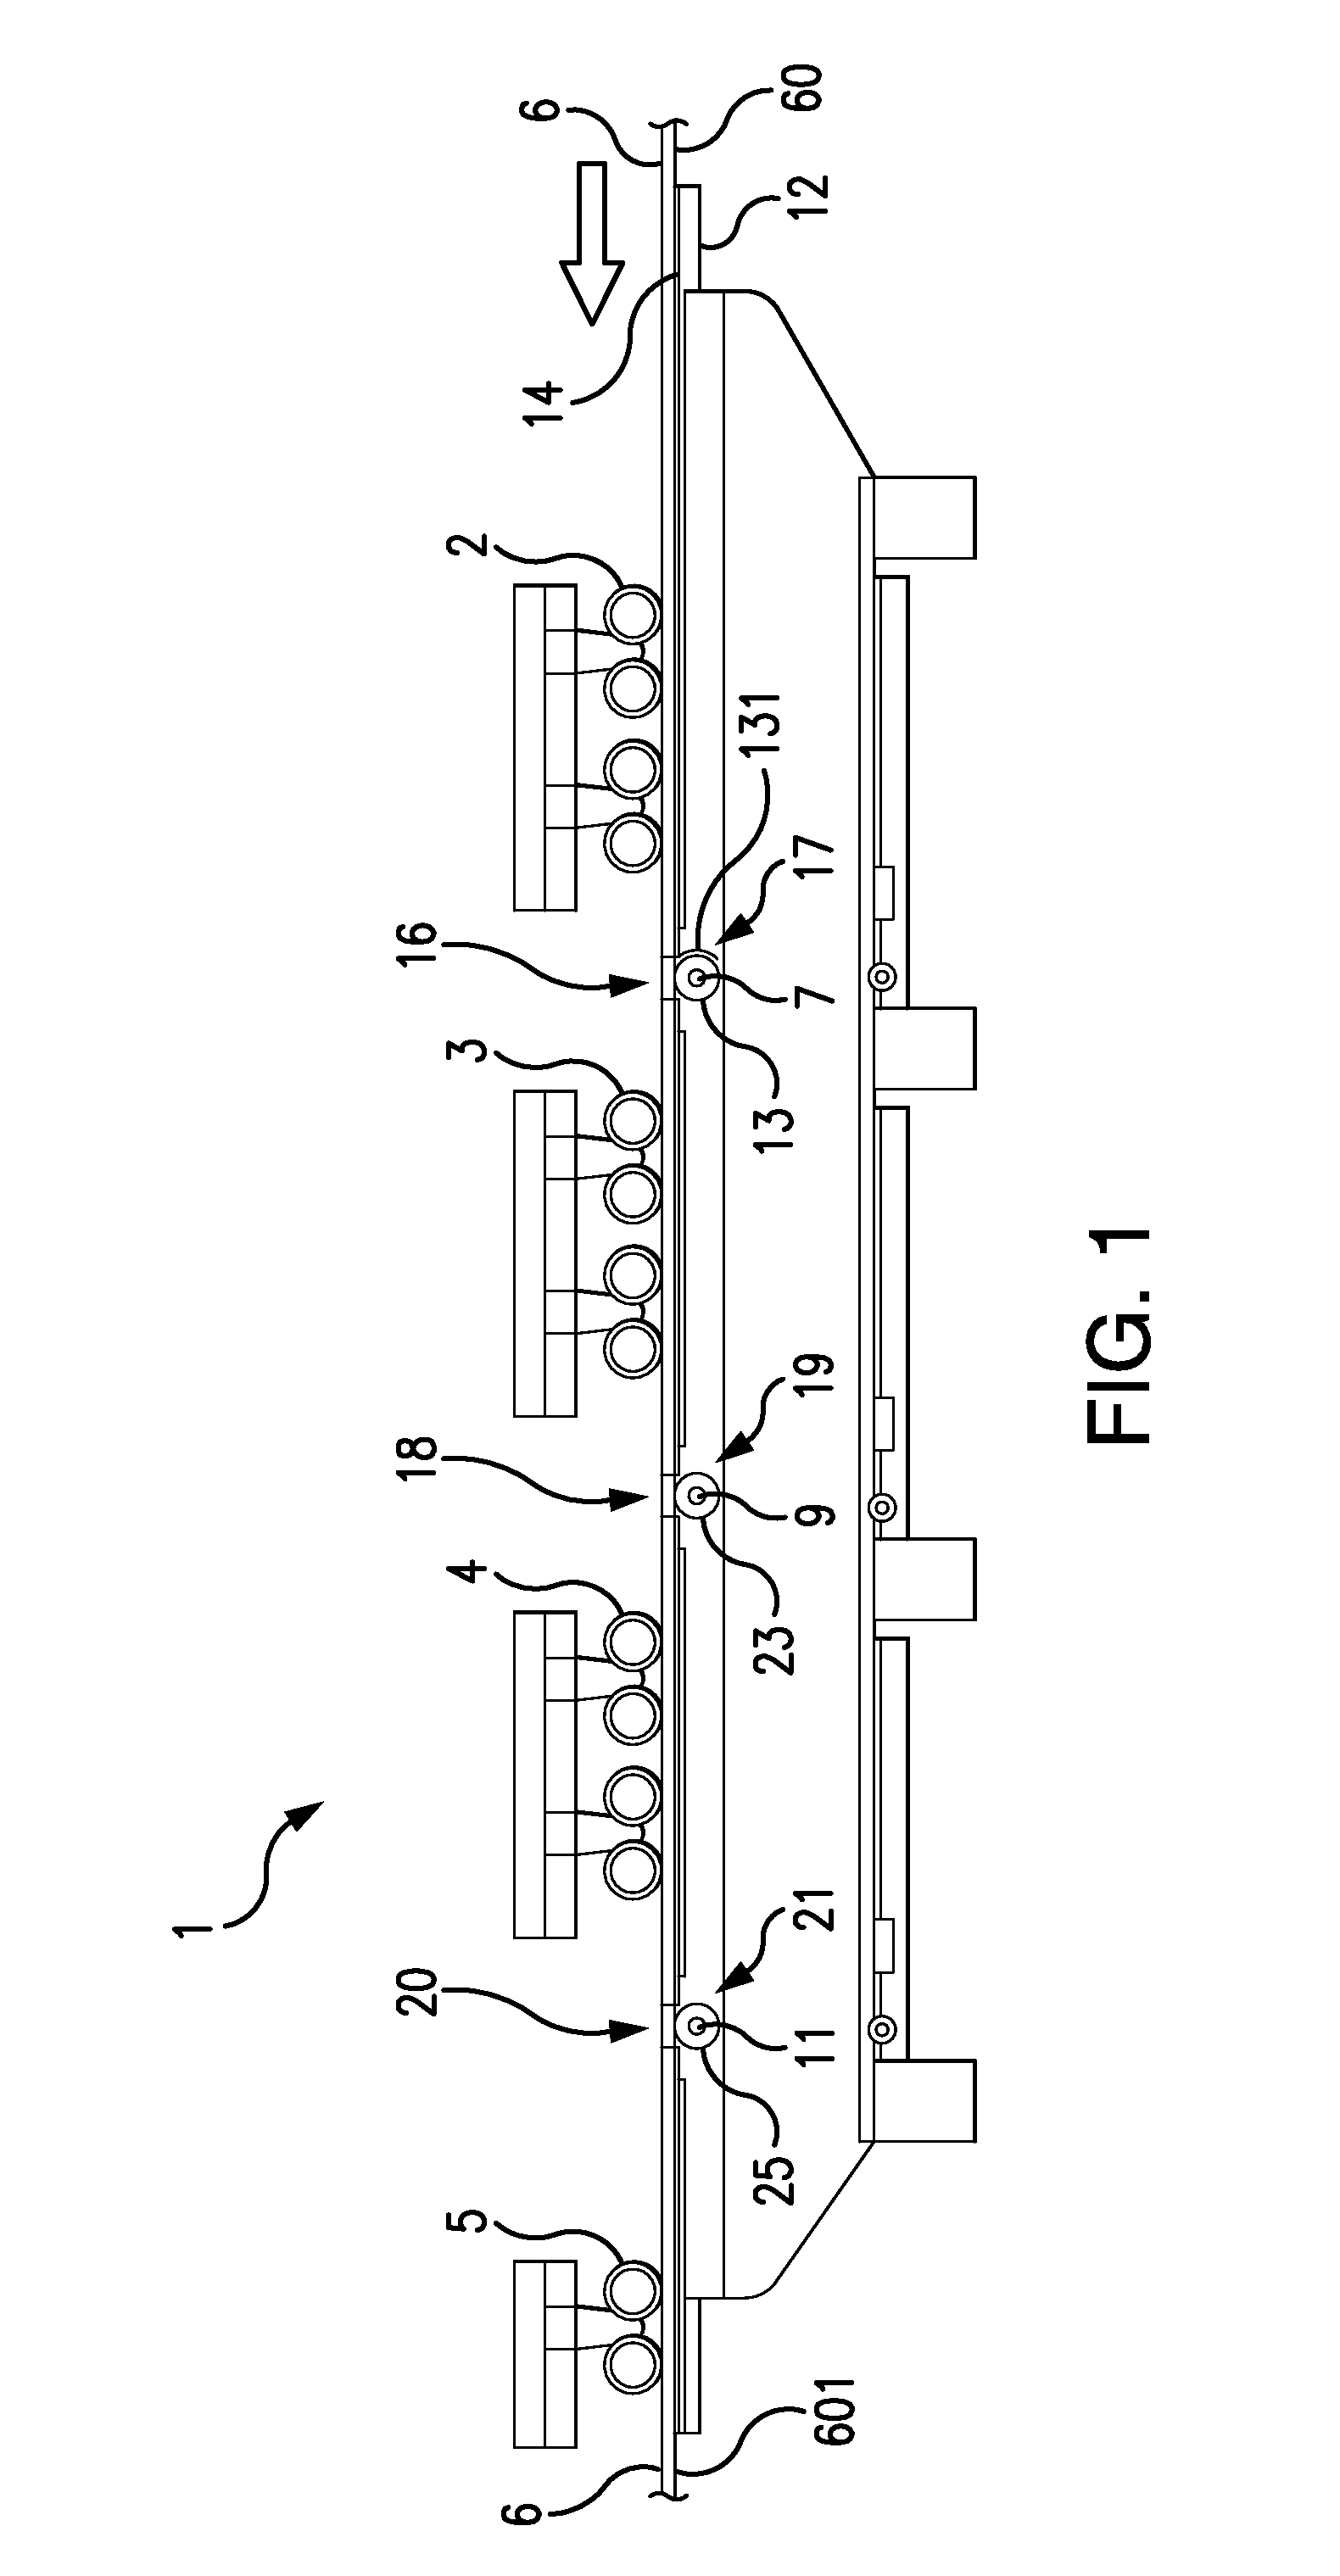 Method For Mechanically Scraping Boards, Apparatus For Same, and Products Made Therewith